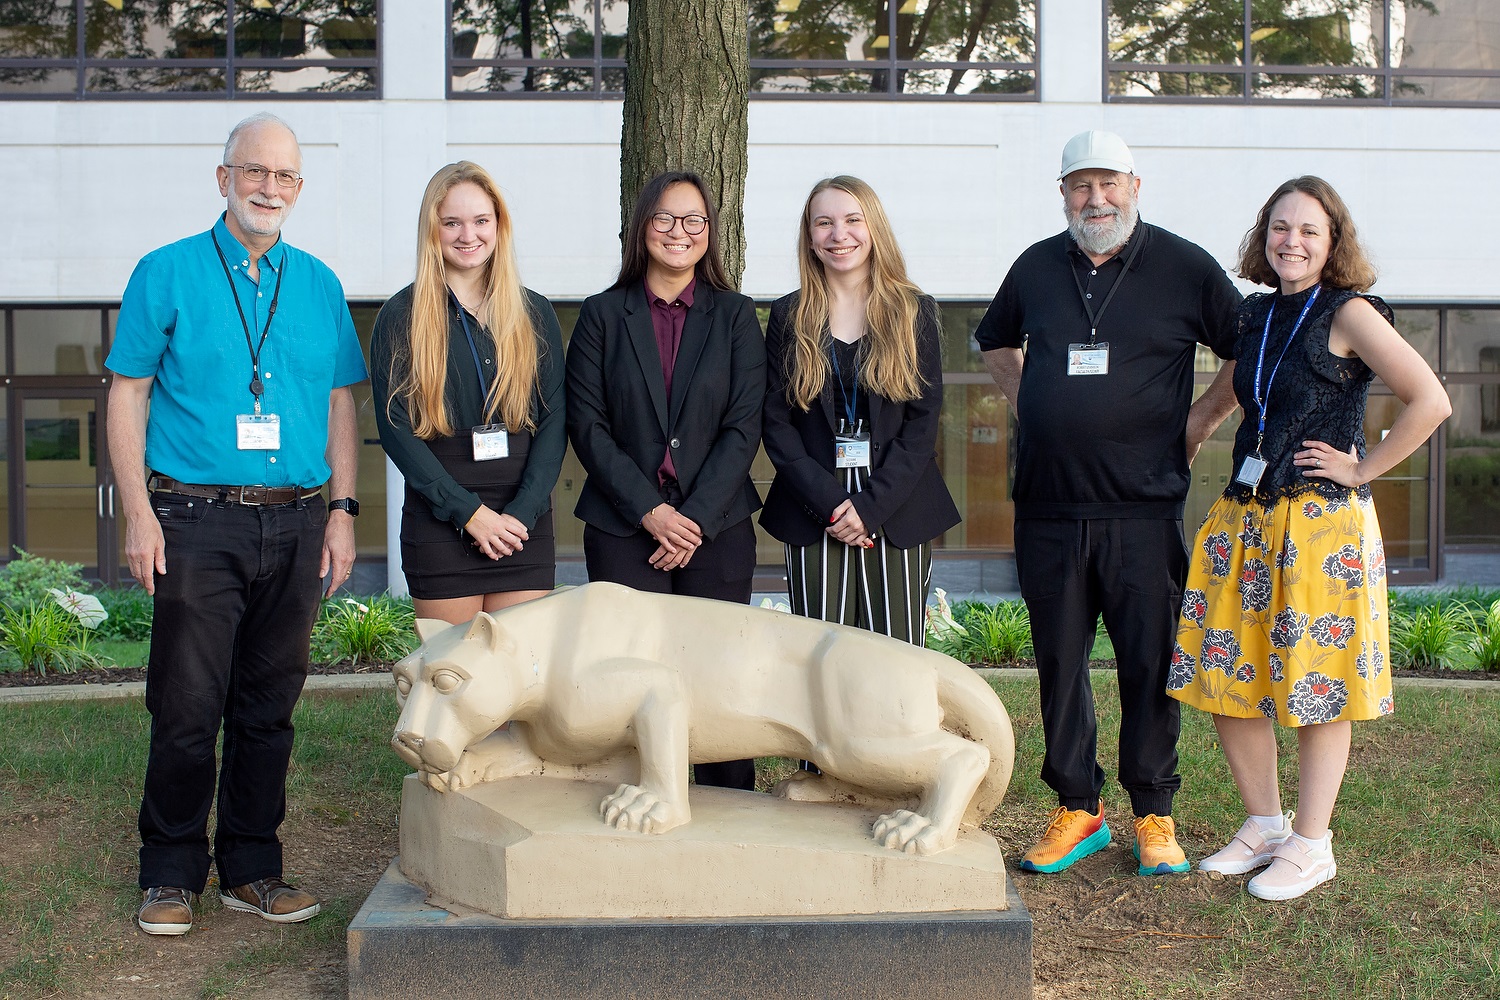 Schreyer Honors College MD/PhD Summer Exposure Program participants pose behind a Nittany Lion statue, along with associate director Aron Lukacher, MD, PhD; co-director Robert Levenson, PhD, right; and program administrator Alison Smolinski, MA.